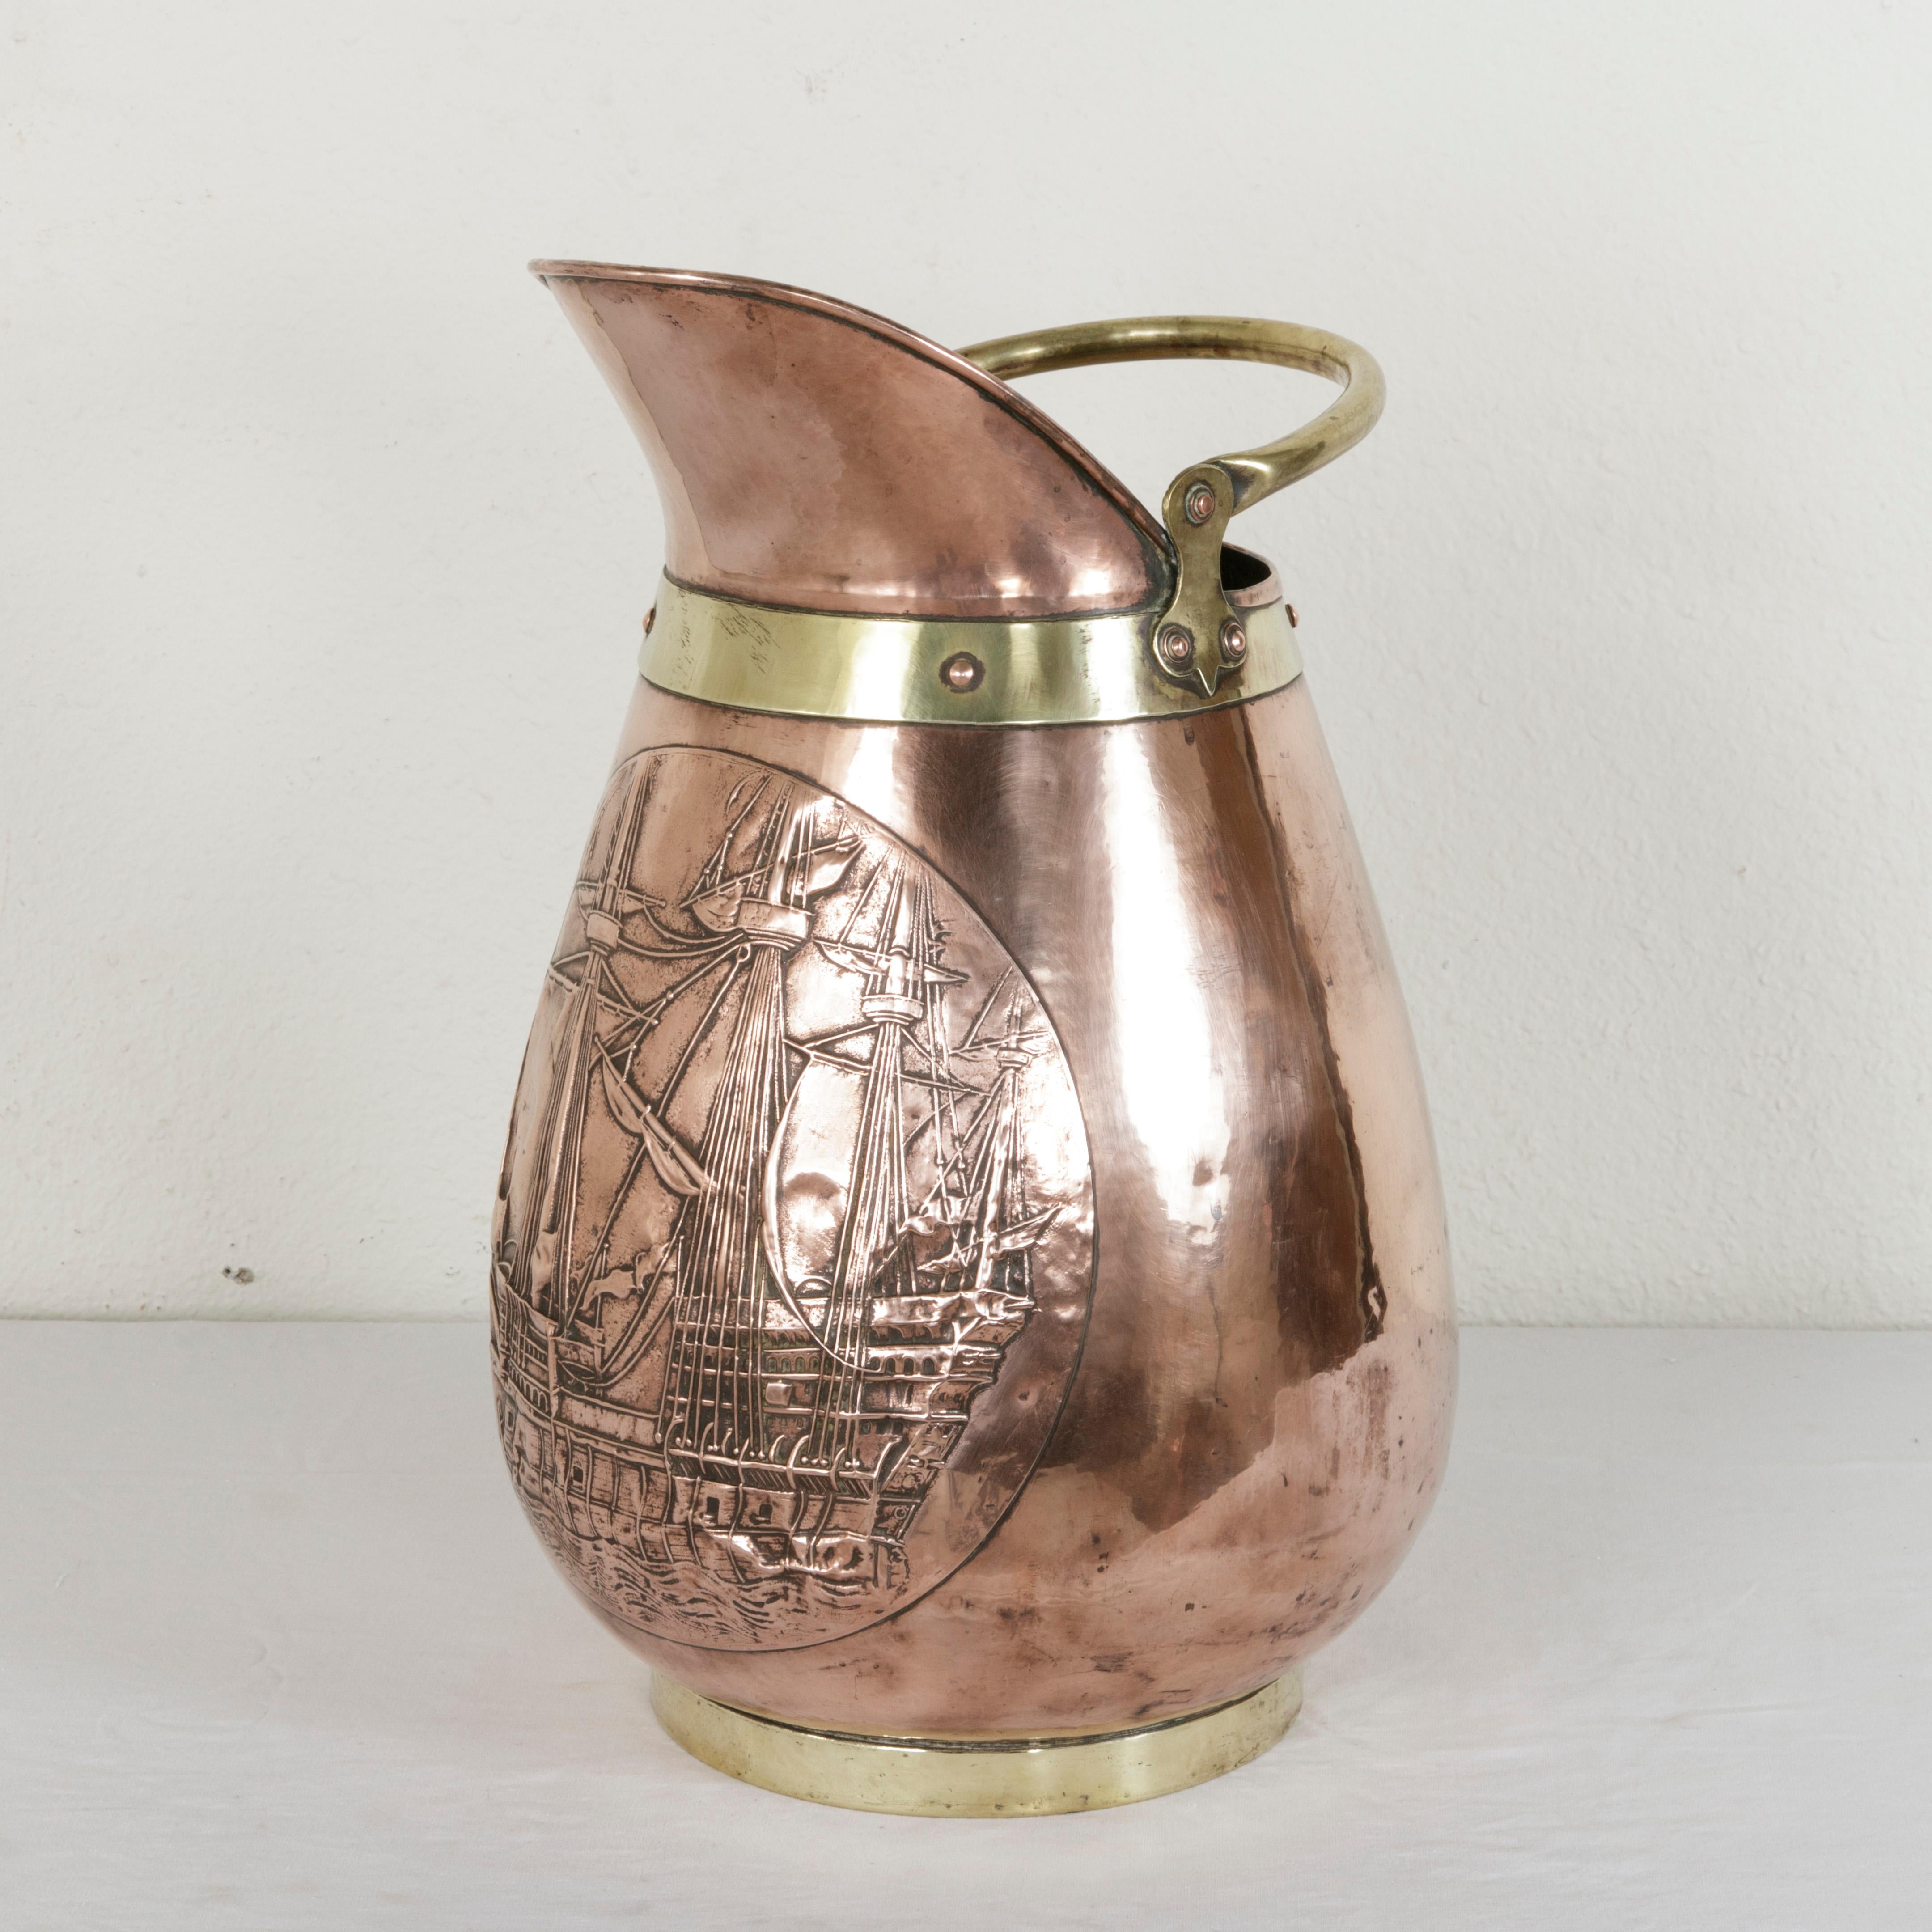 This very large French copper repousse pitcher from the mid-20th century features a nautical scene of a tripled masted galleon, a 17th century type of ship. Copper riveted brass banding surrounds the base and top, and a brass handle allows for easy